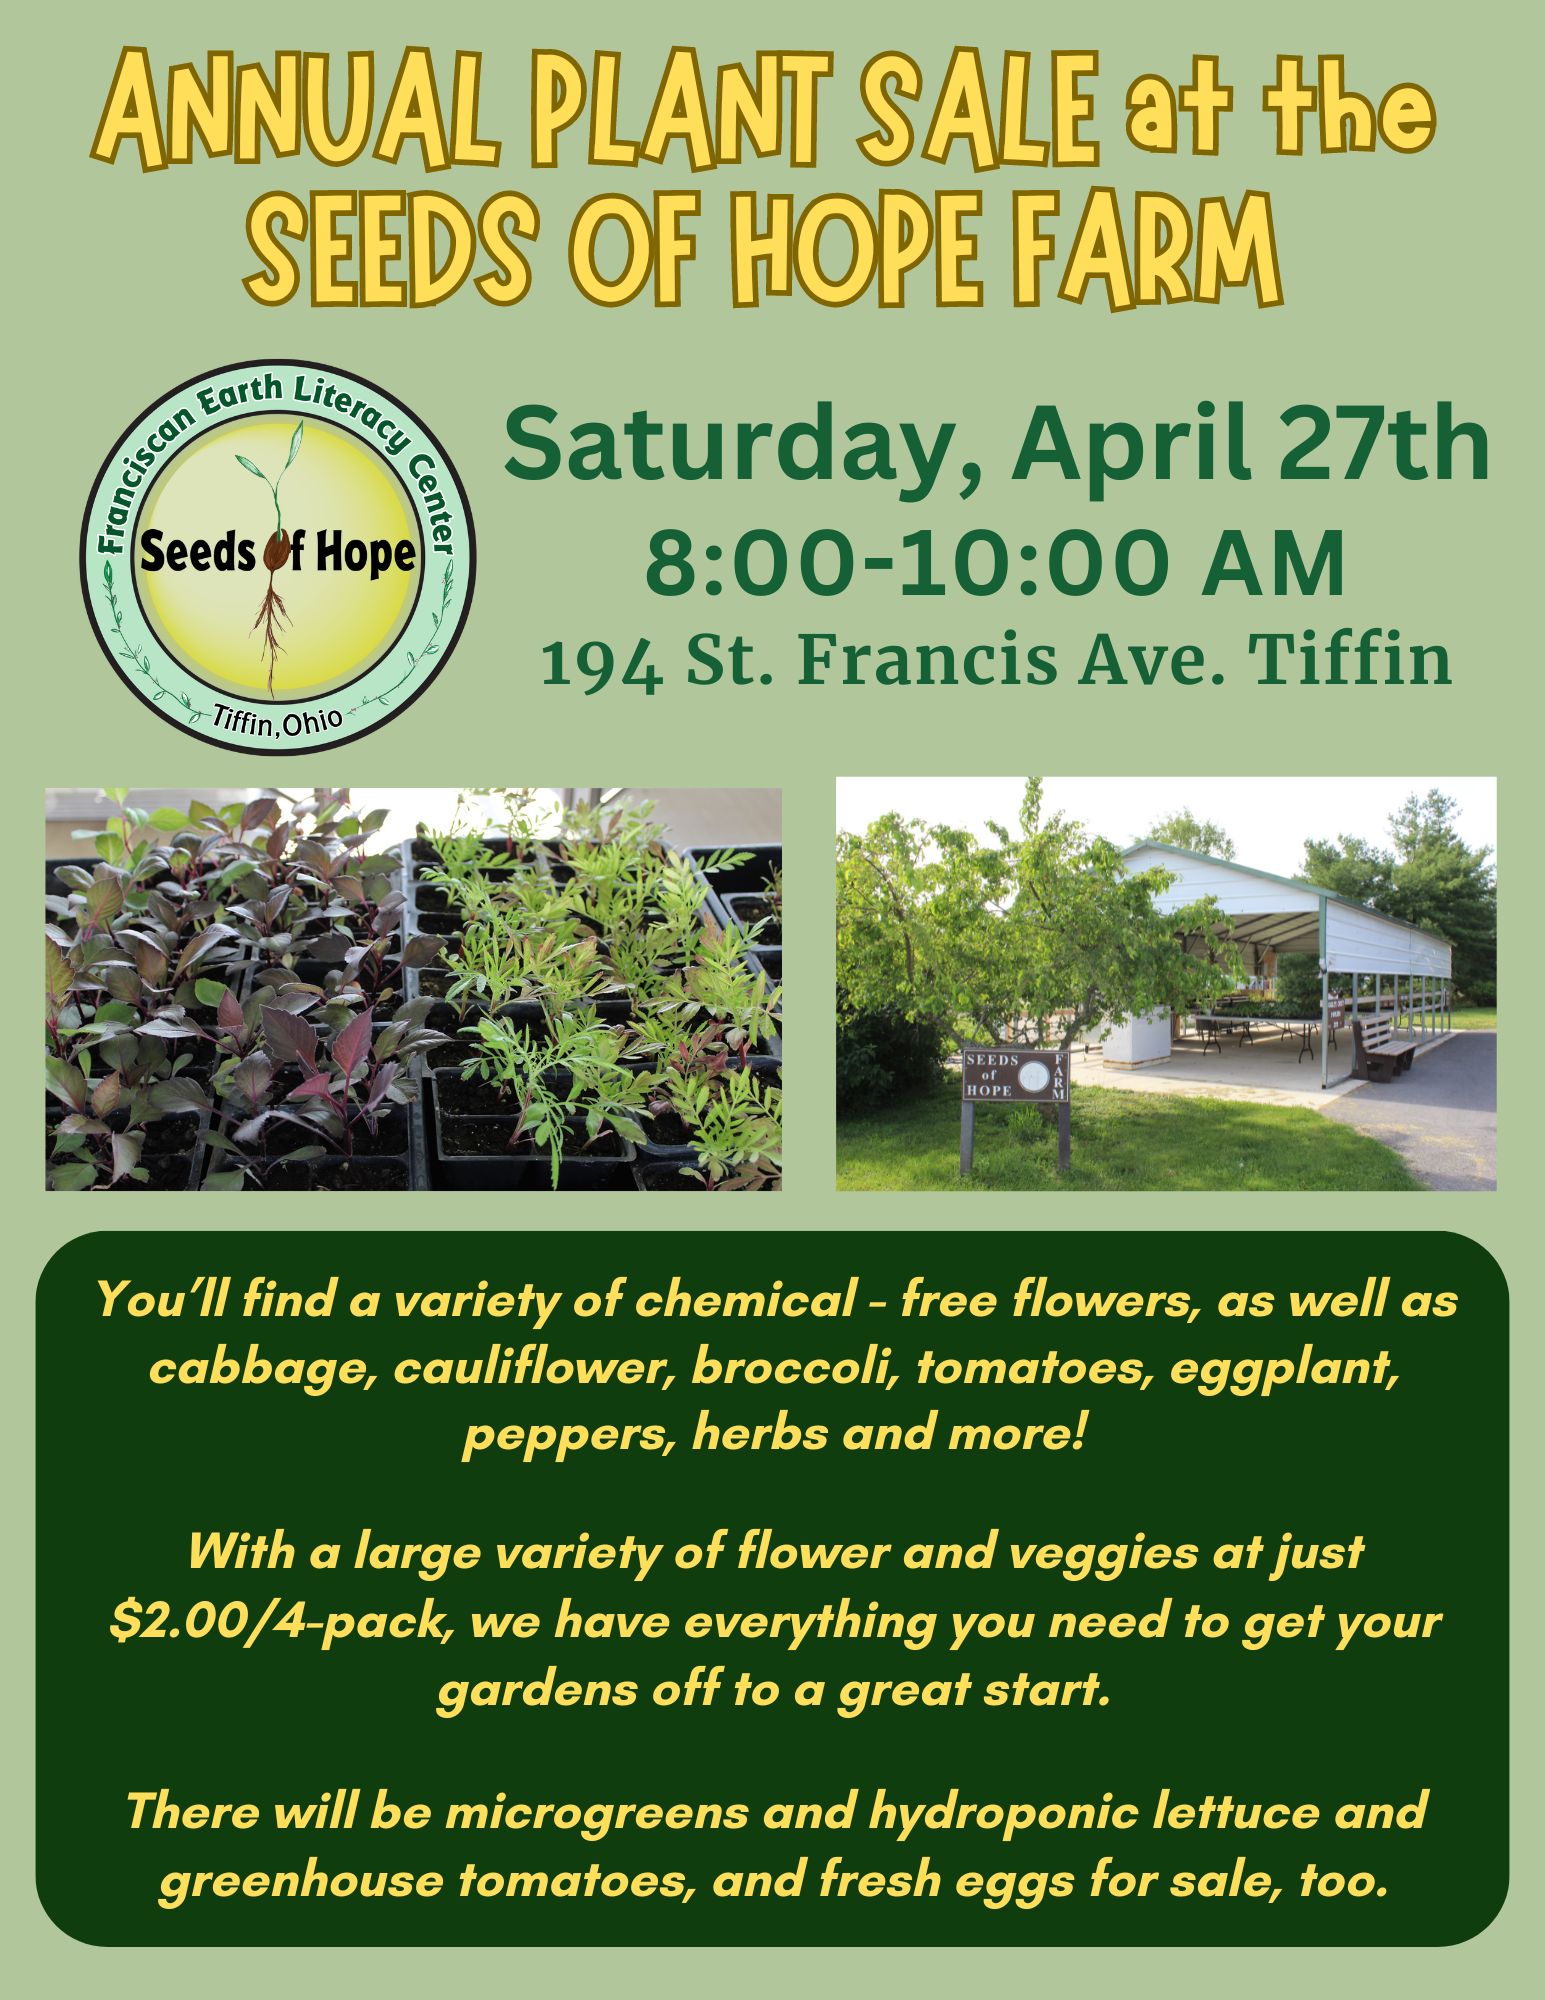 Annual Plant Sale at the Seeds of Hope Farm